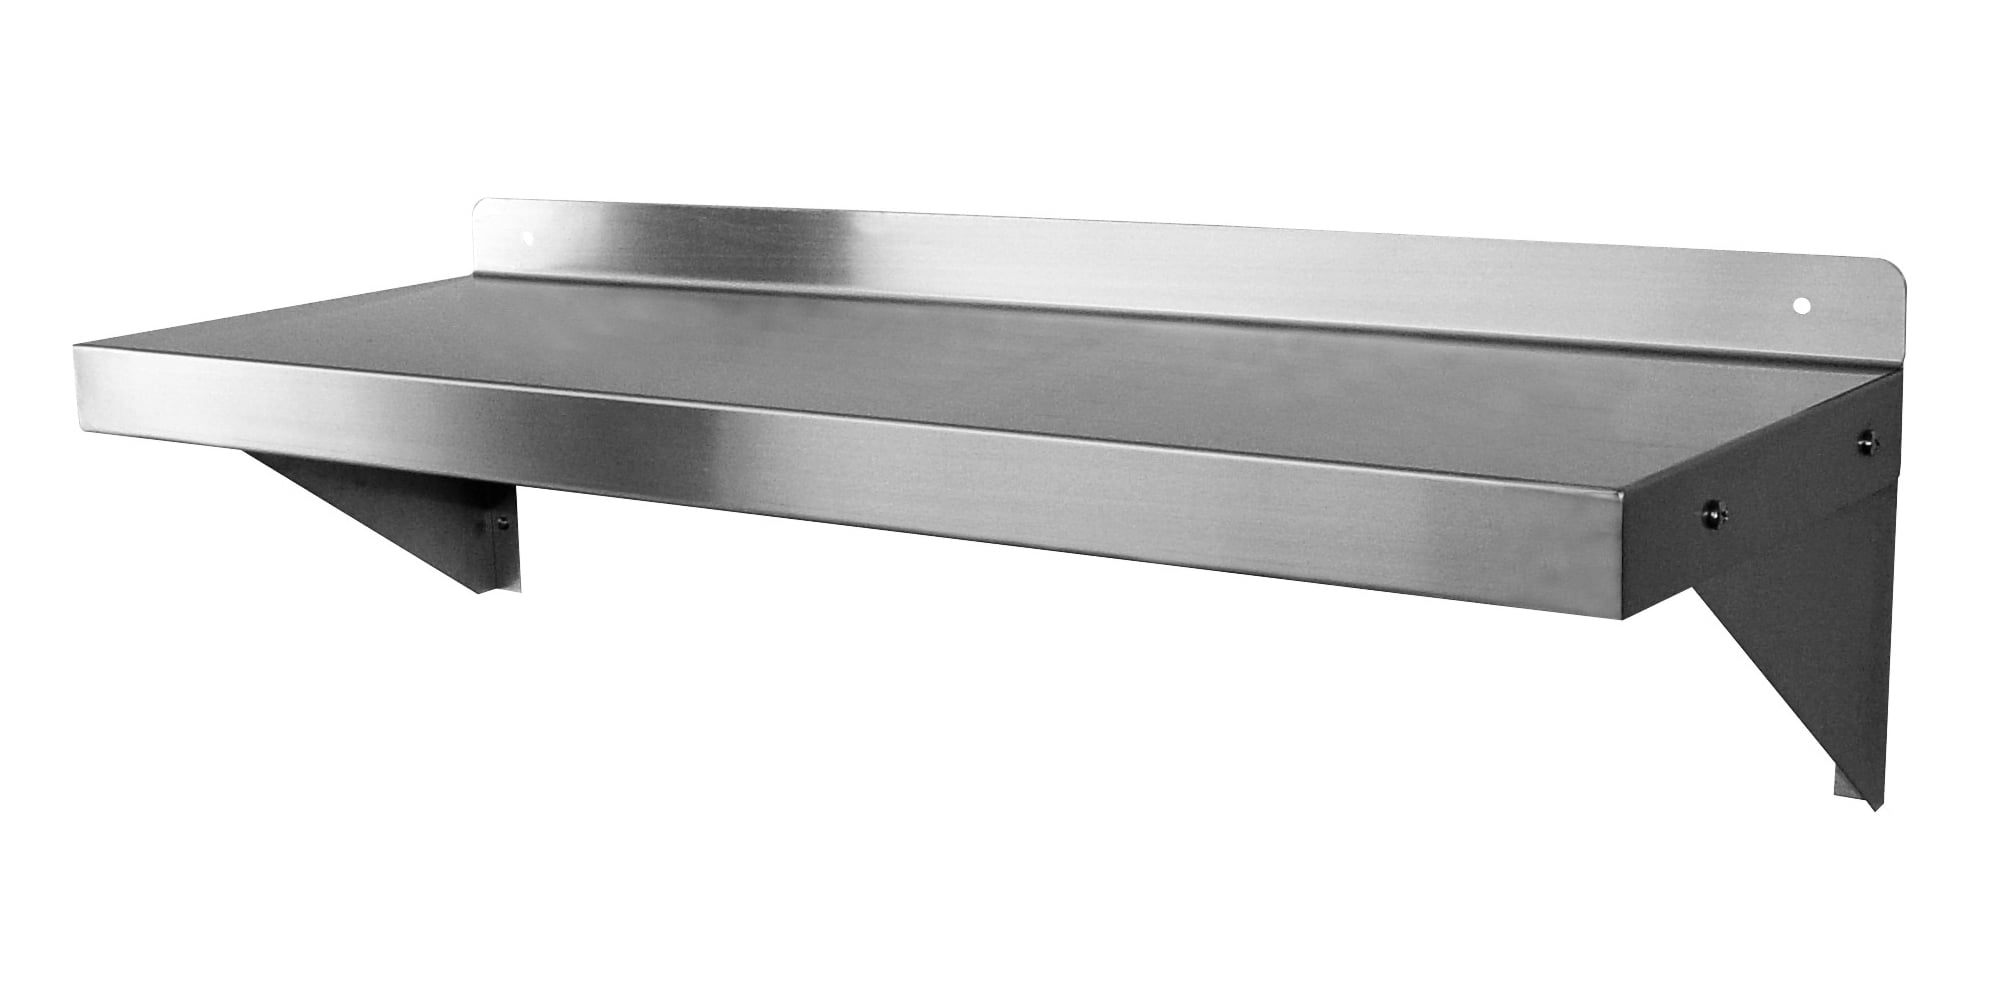 stainless wall mounted commercial kitchen shelves